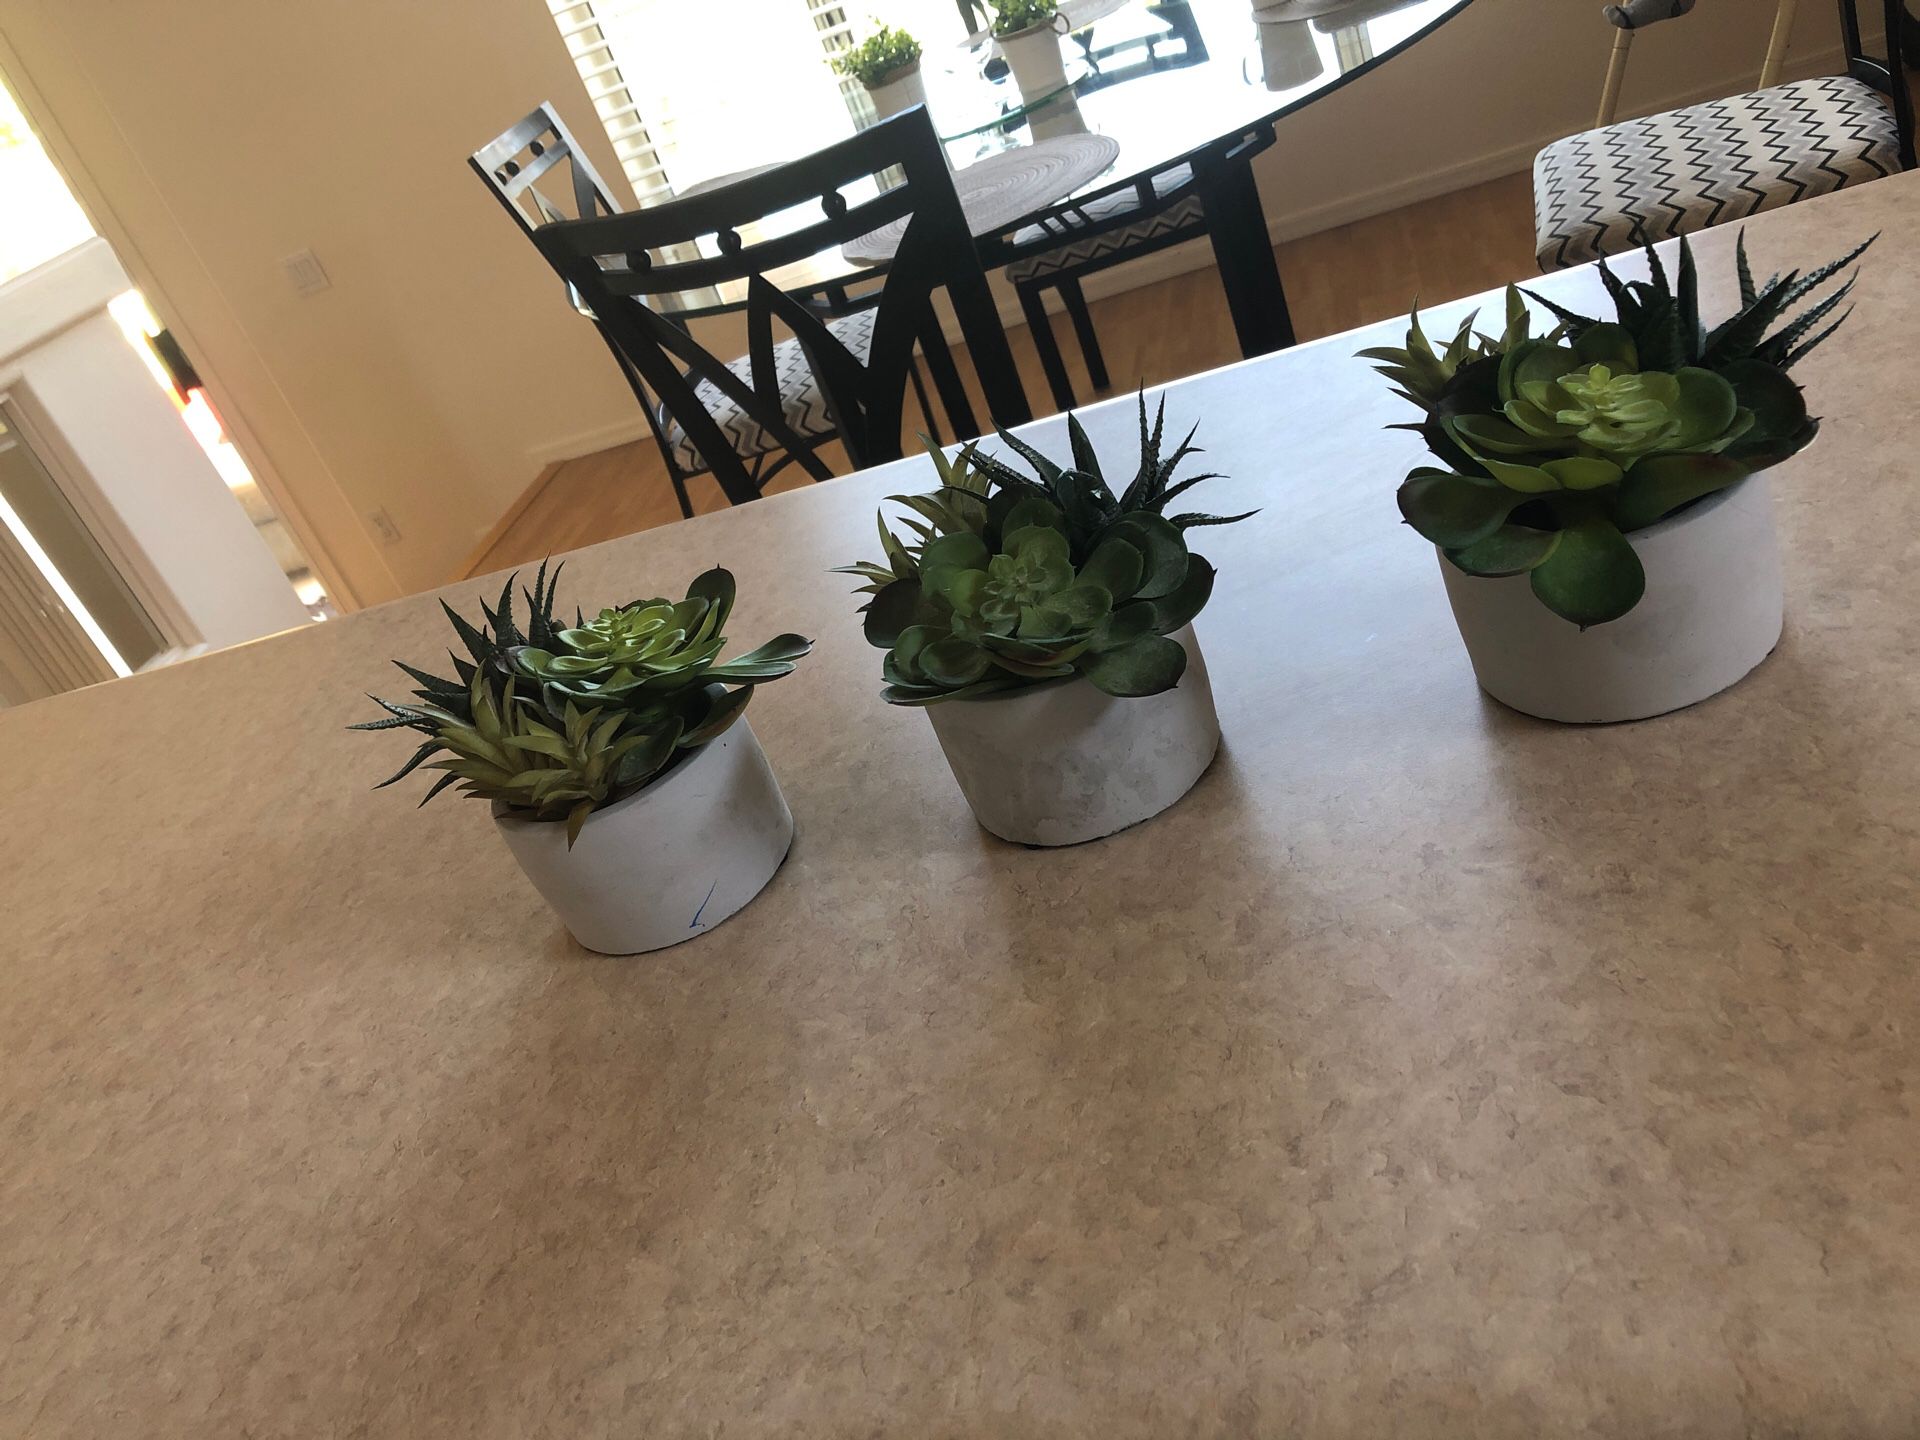 Fake potted plants